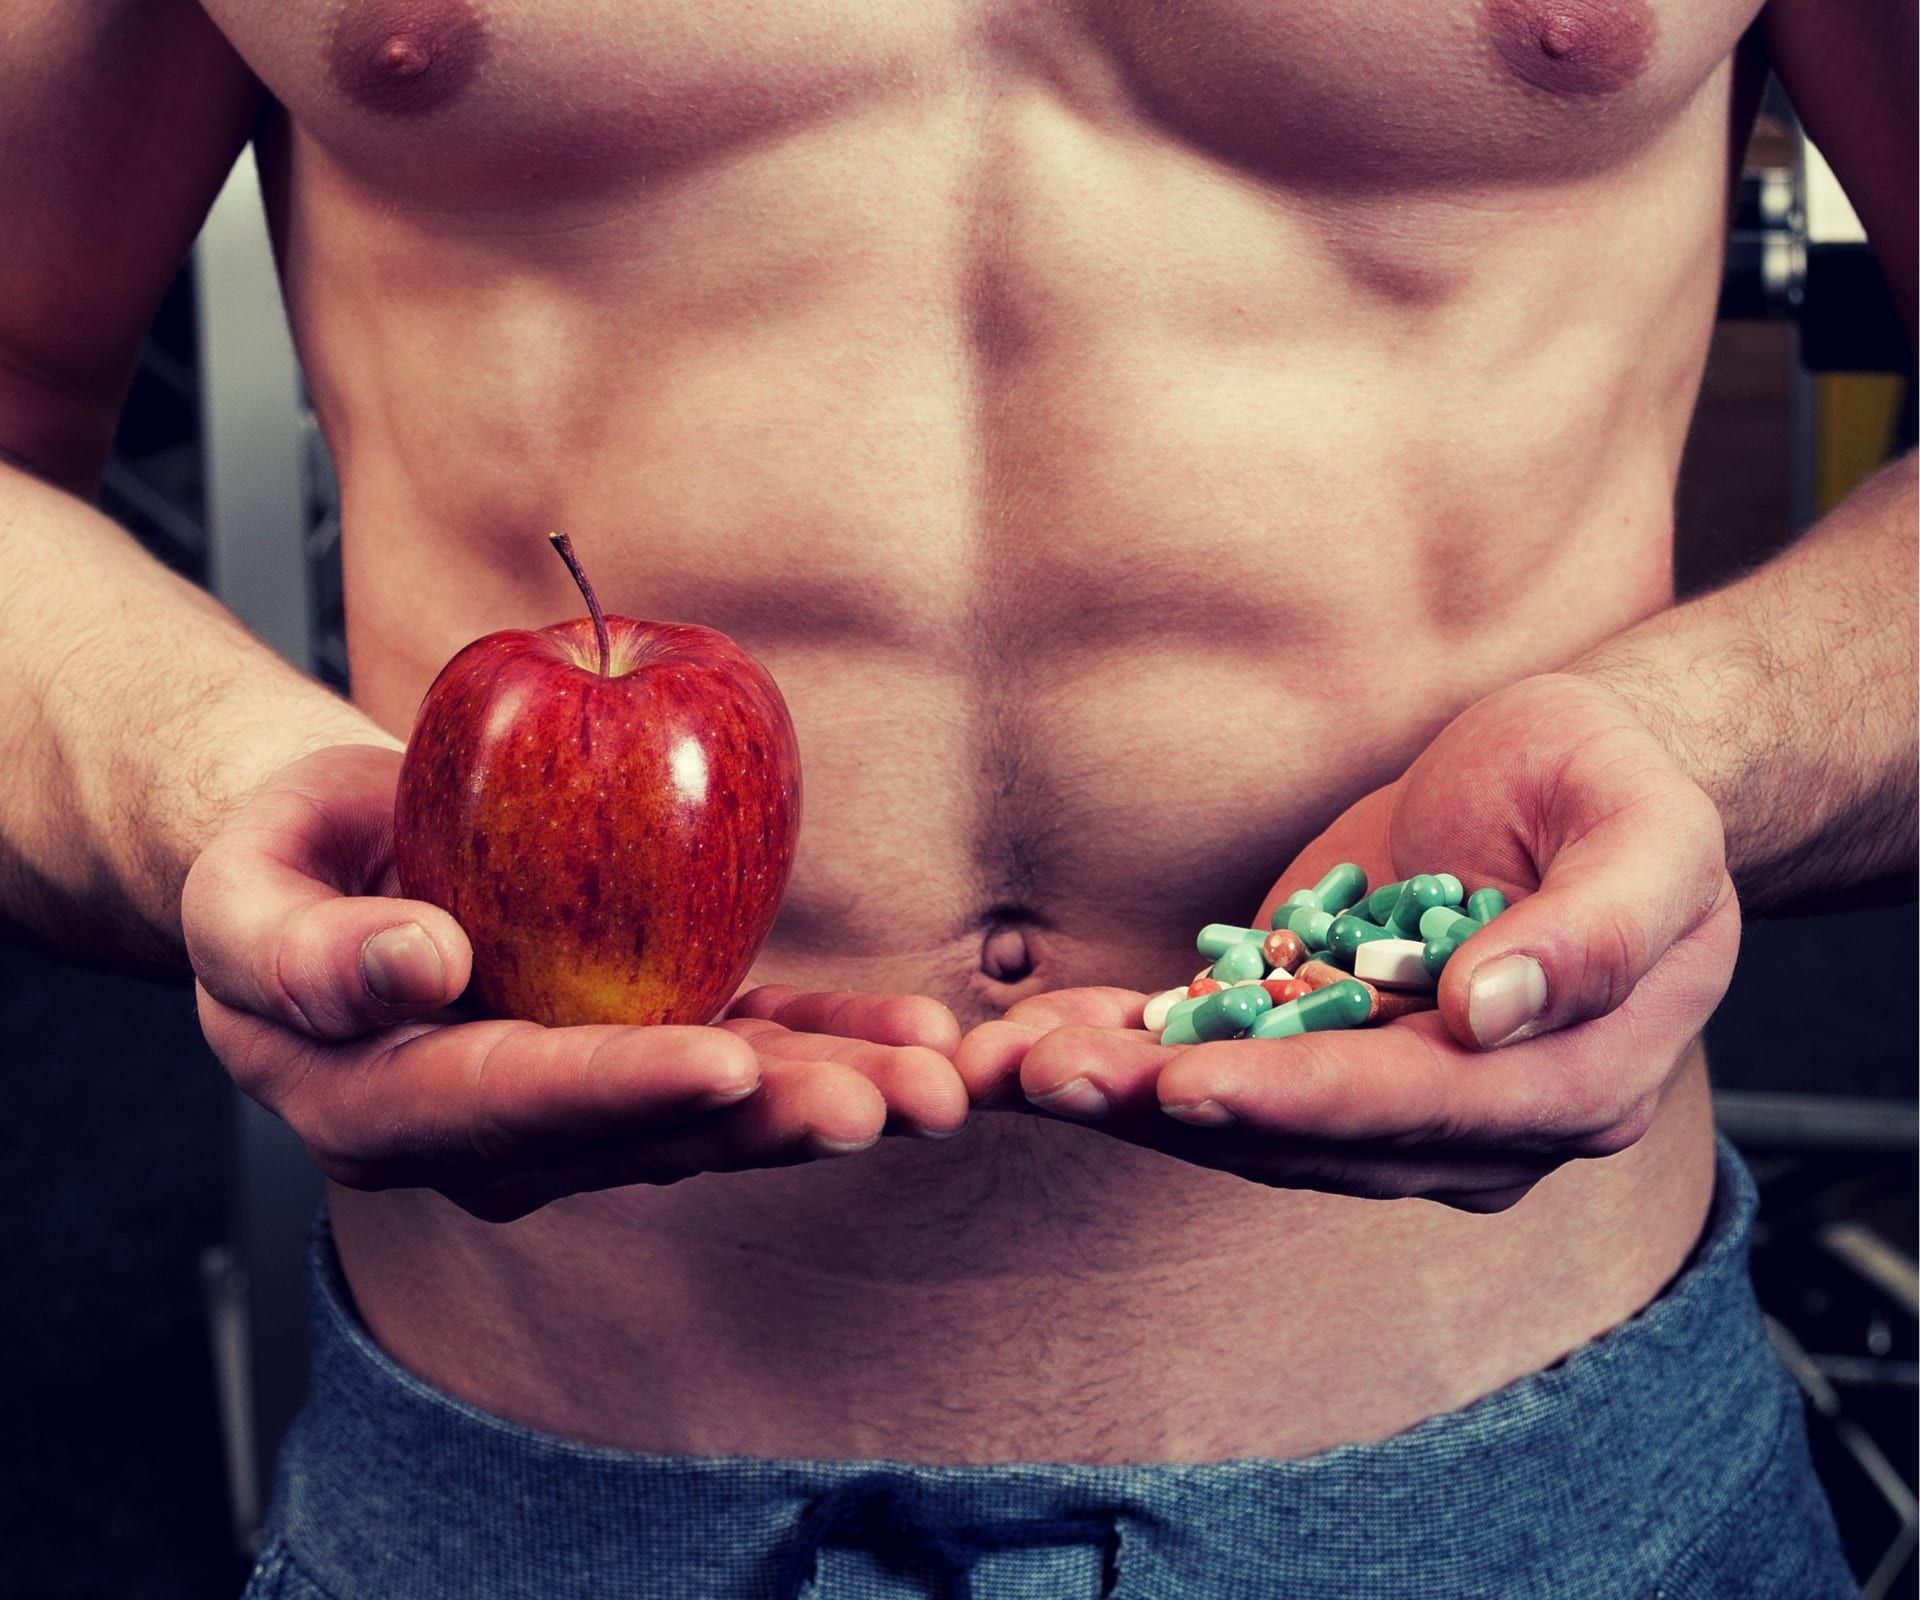 D-Aspartic Acid Testosterone Muscle man choice between apple and pills